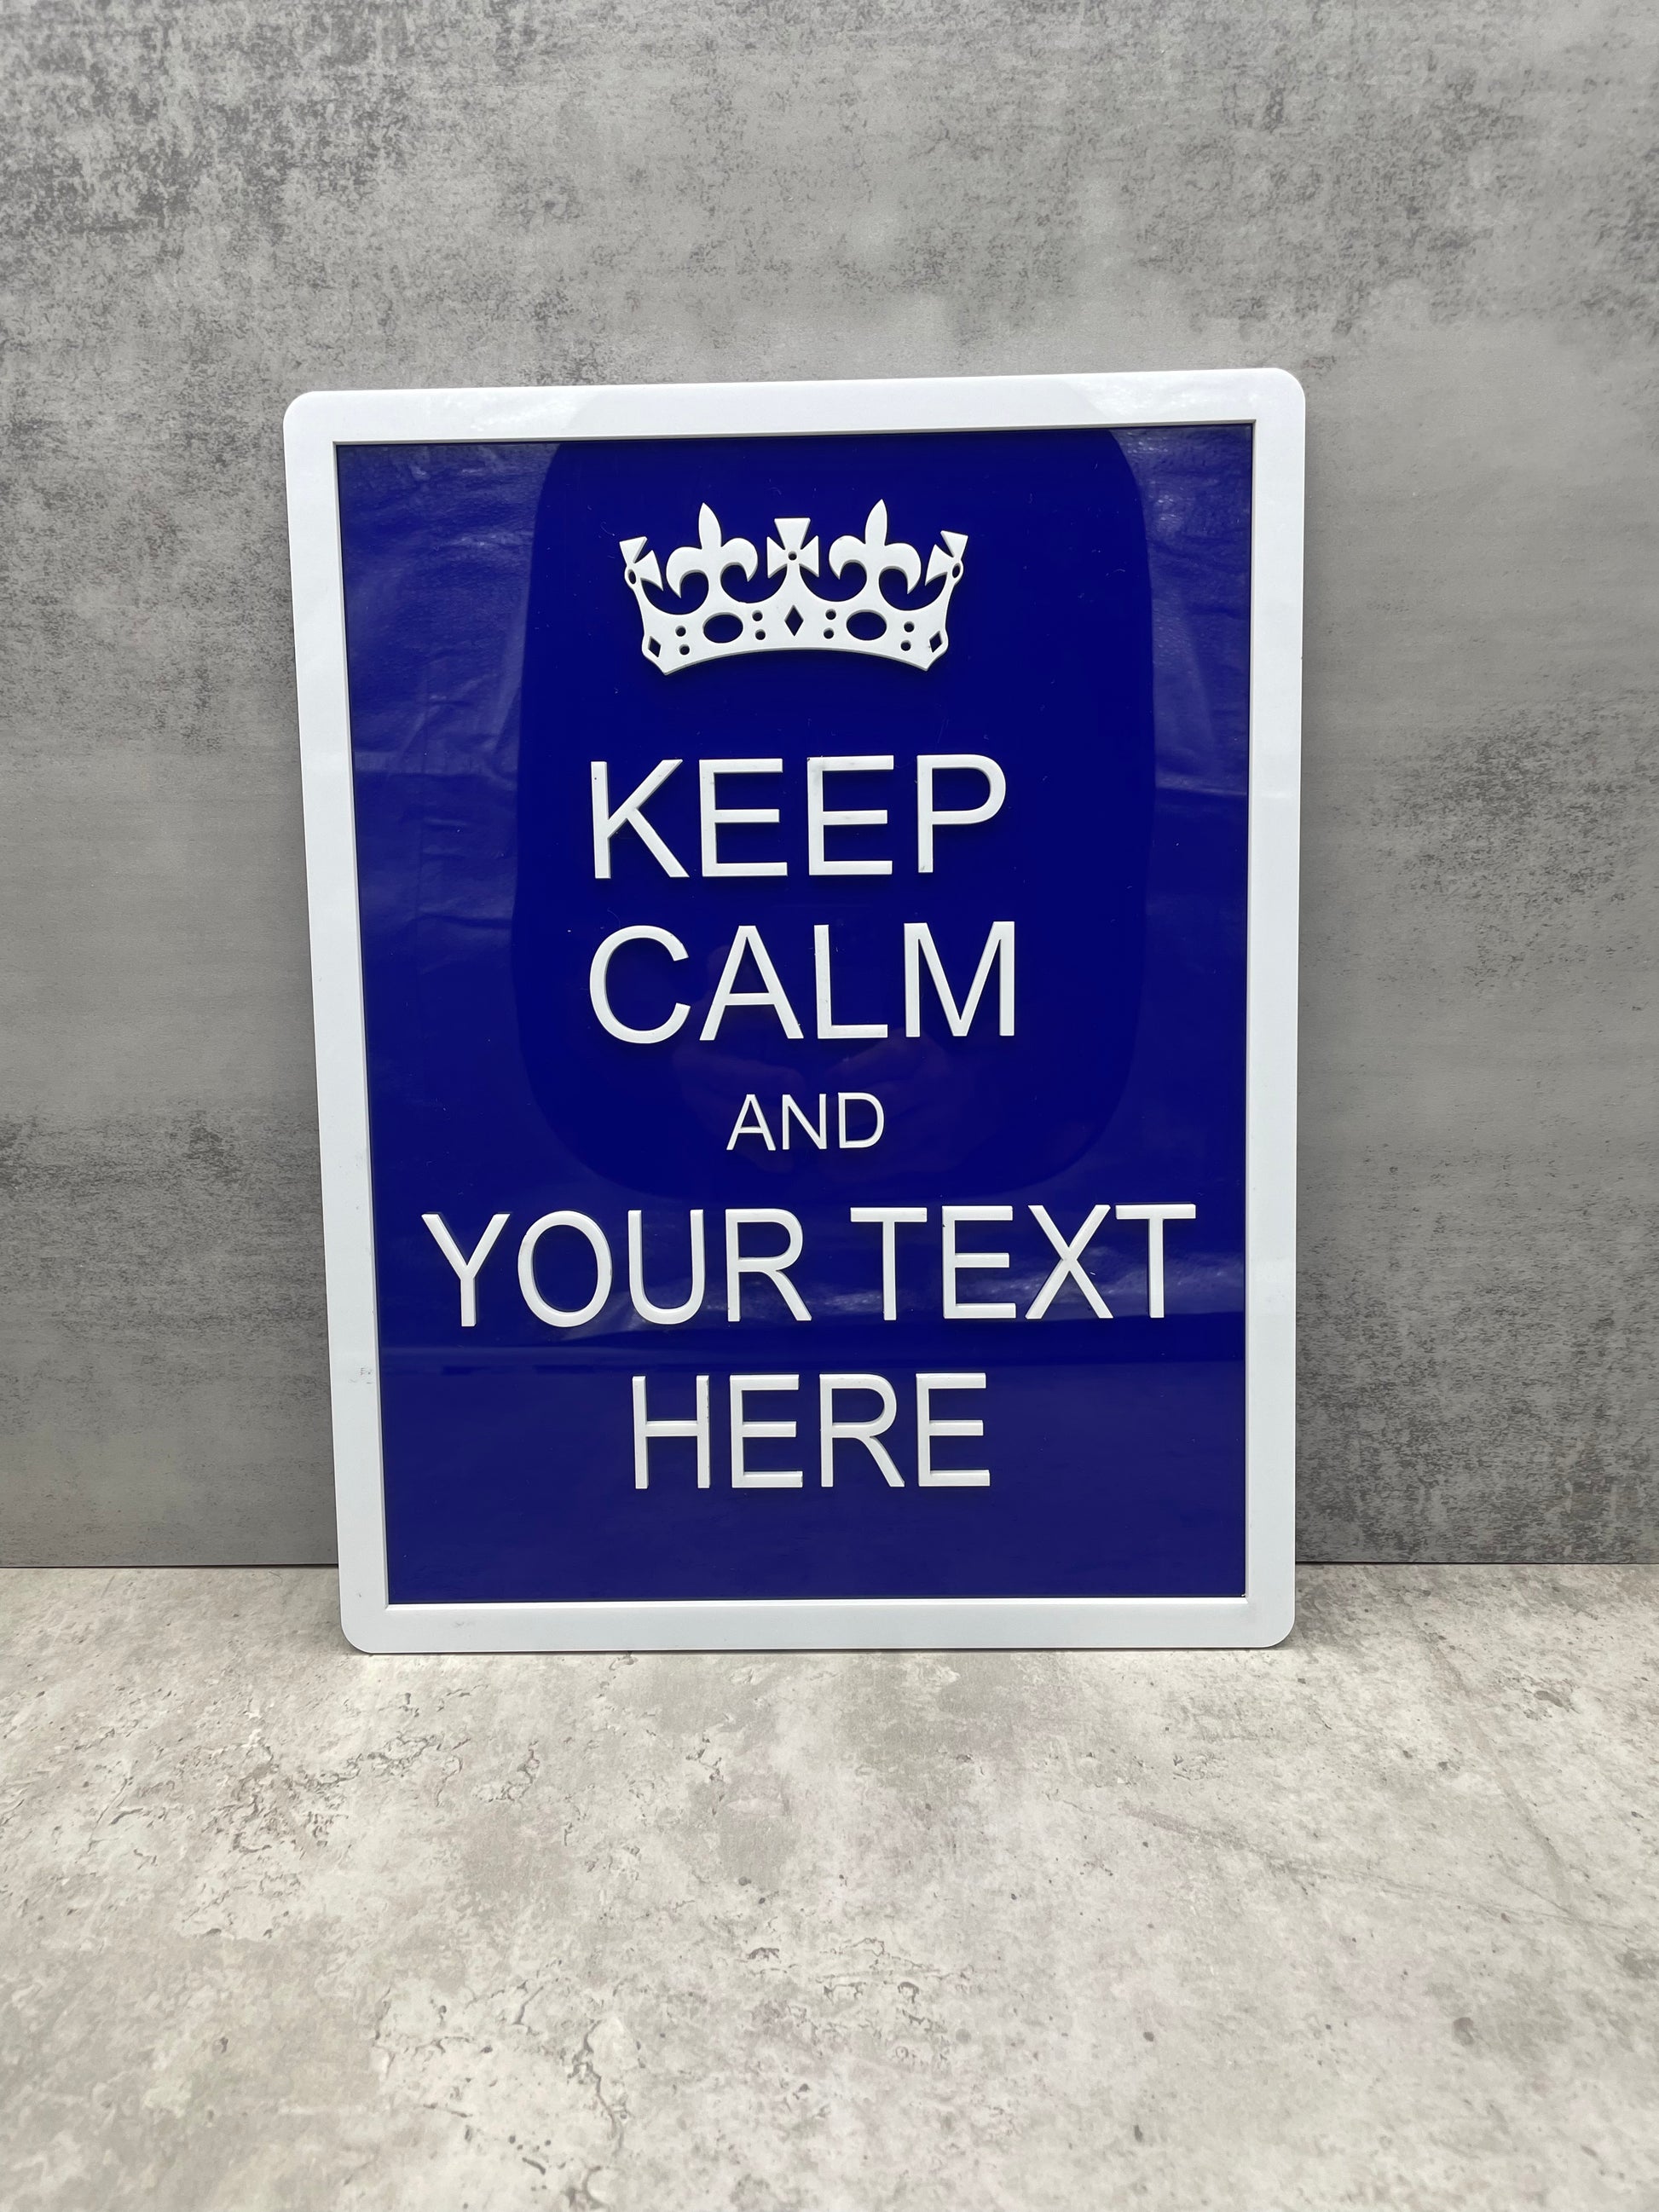 keep calm and carry on custom sign in blue and white